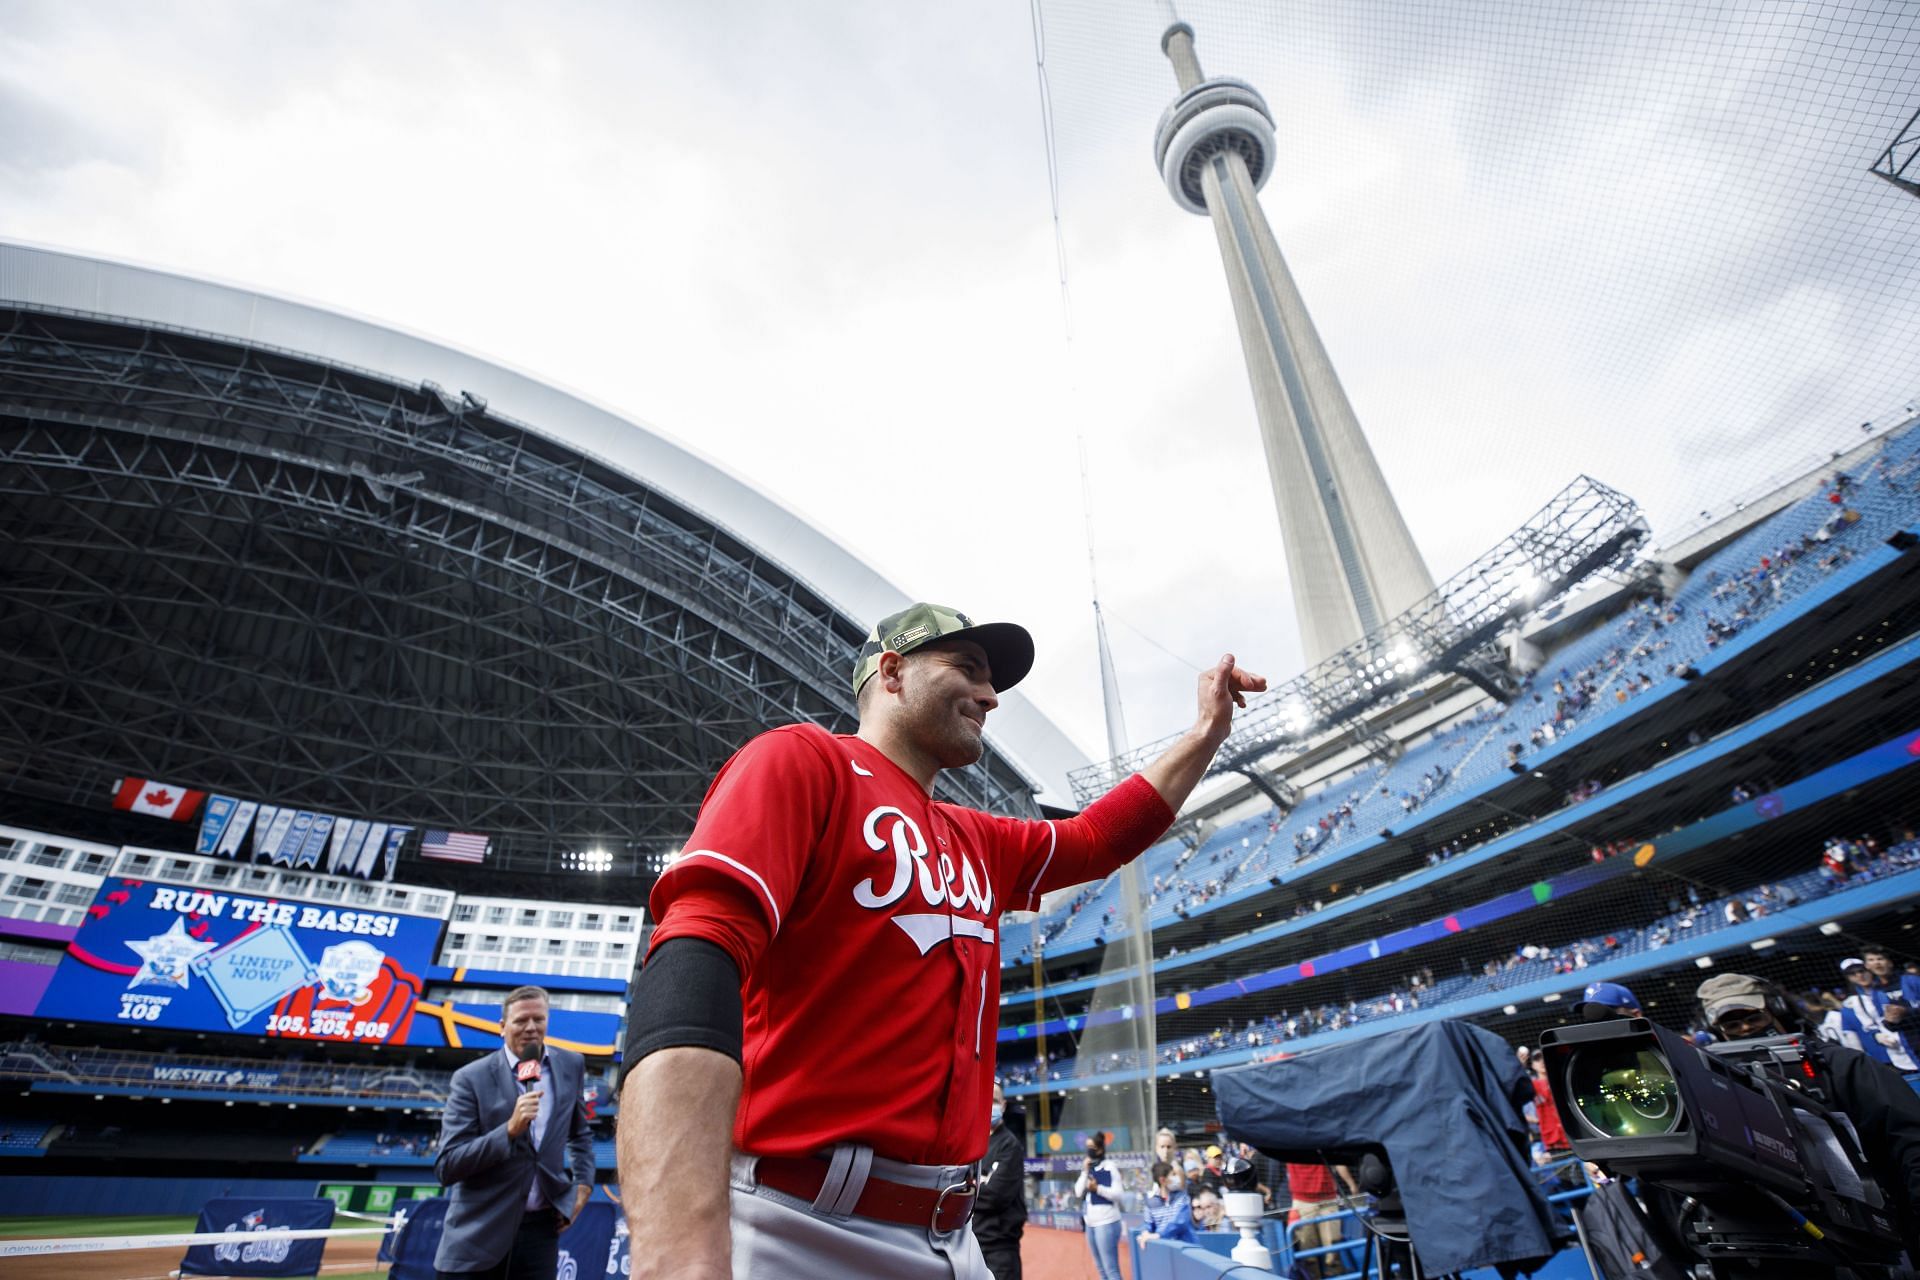 Cincinnati Reds v Toronto Blue Jays: TORONTO, ON - MAY 22: Joey Votto #19 of the Cincinnati Reds waves as he leaves the field following their MLB game victory over the Toronto Blue Jays at Rogers Centre on May 22, 2022, in Toronto, Canada. (Photo by Cole Burston/Getty Images)